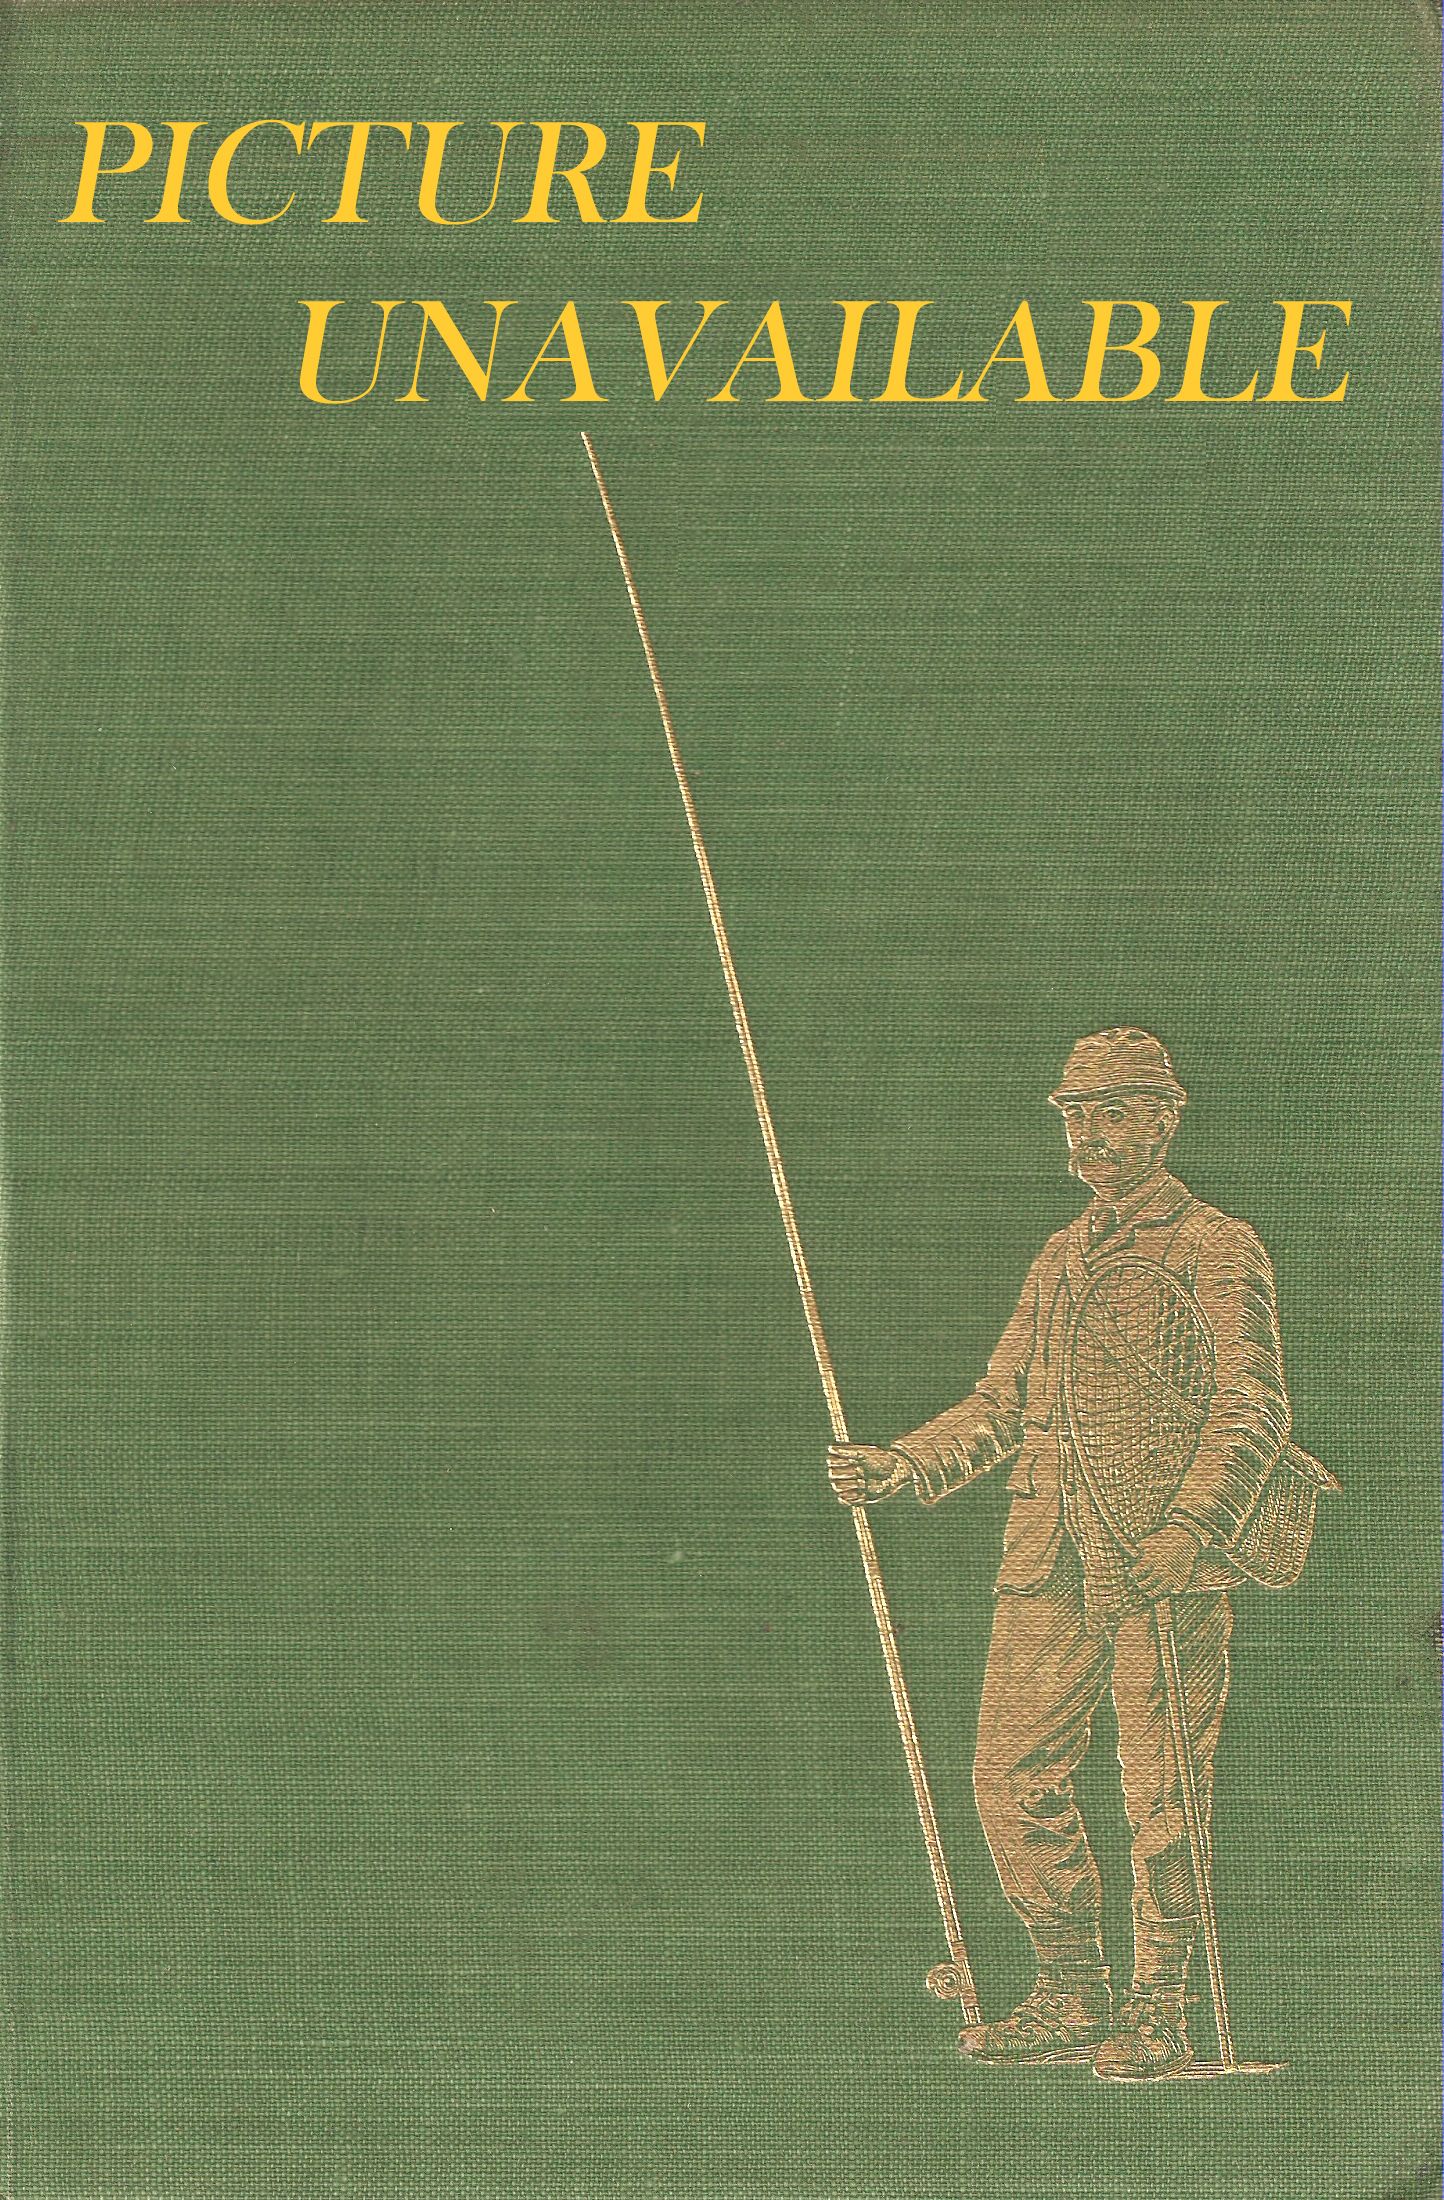 THE COMPLETE BOOK OF RIVER FISHING. By Len Arbery.